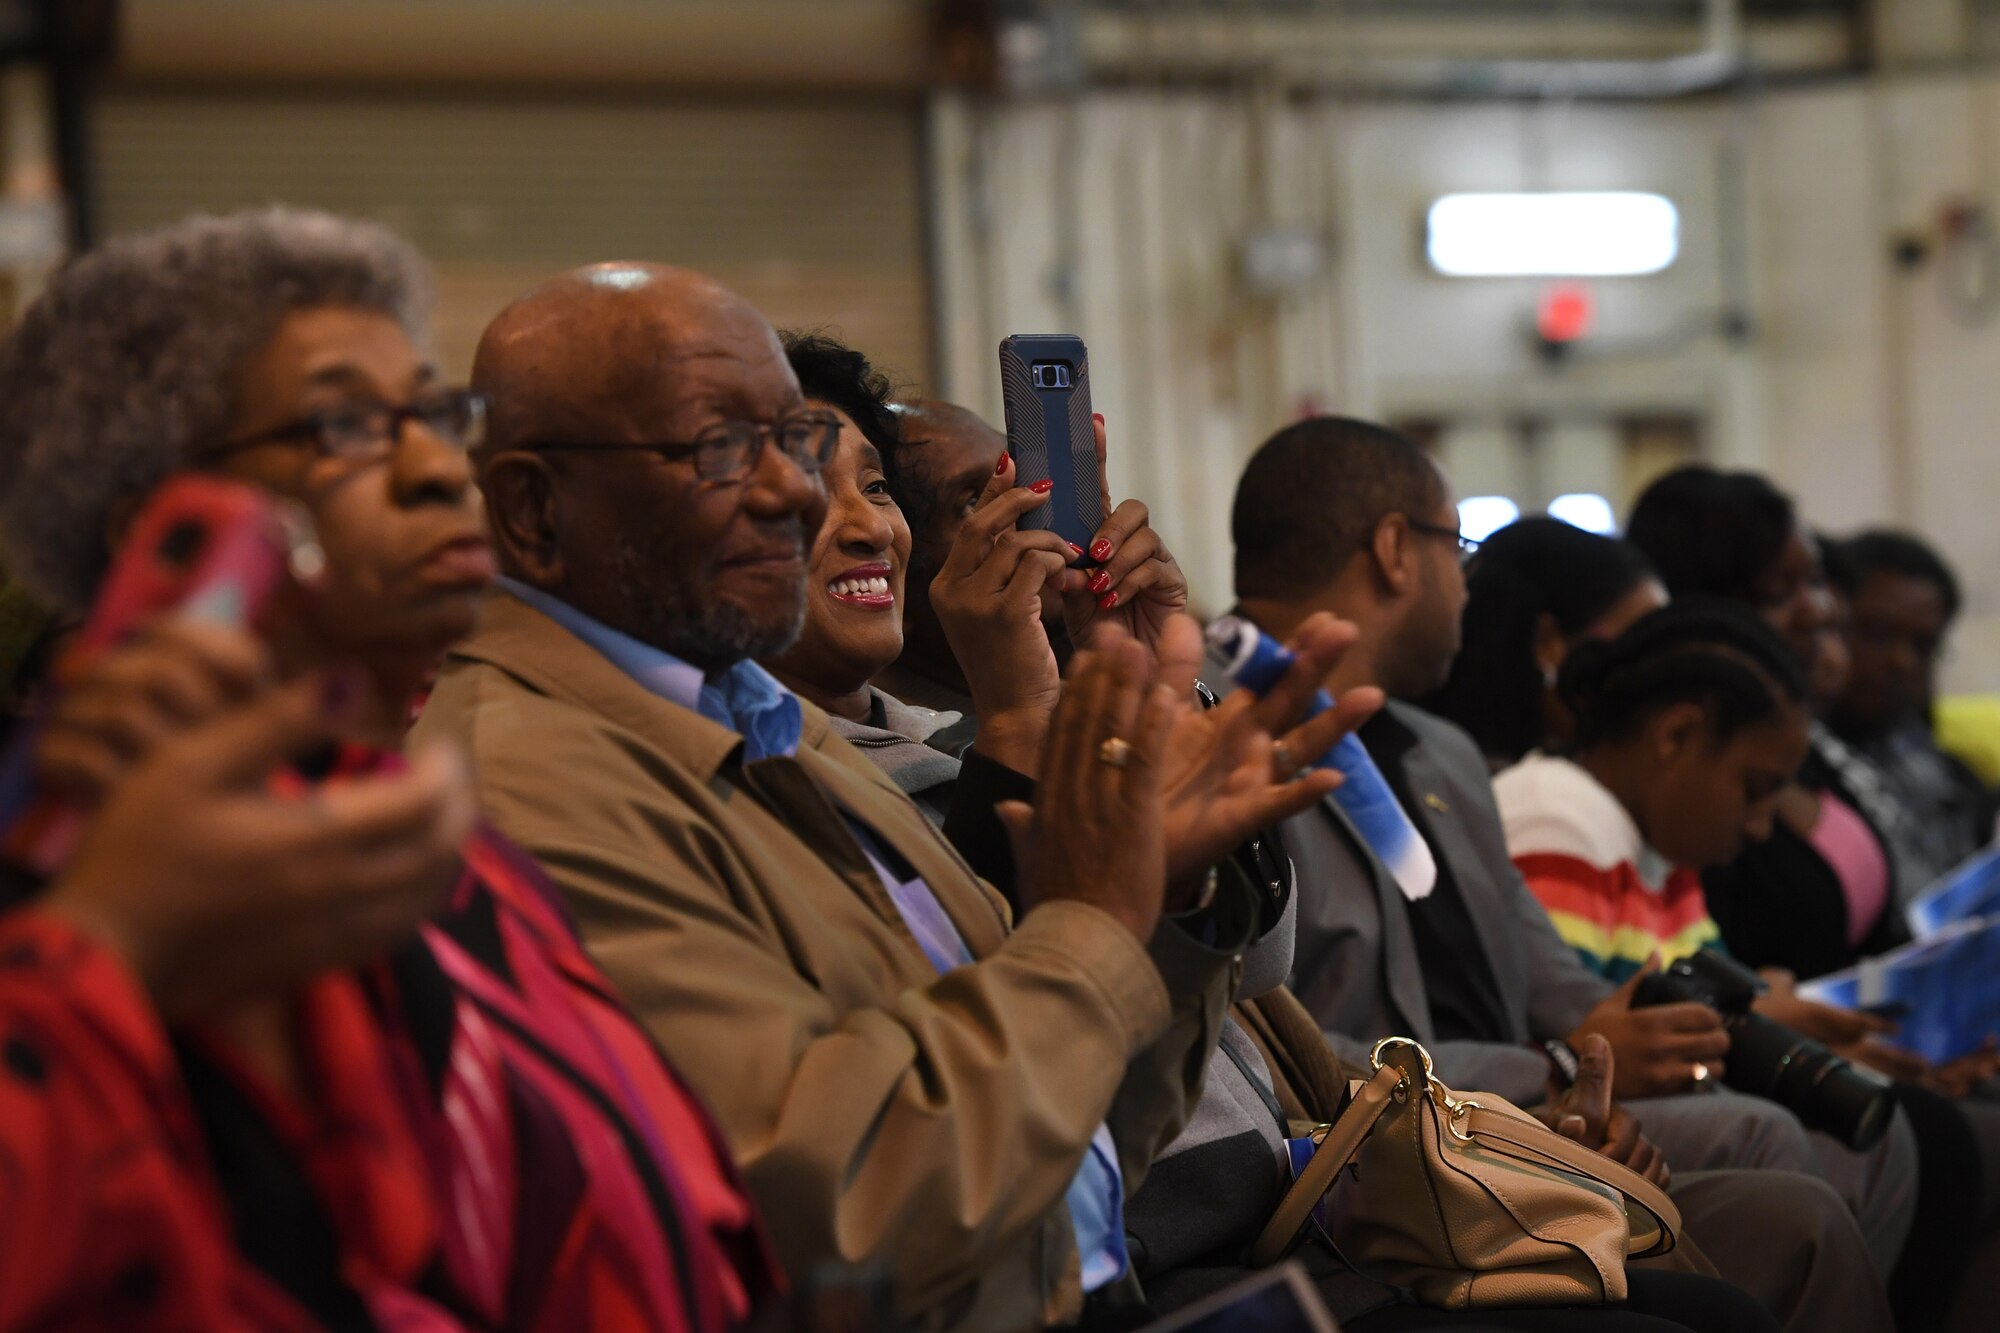 Family and friends smile and applaud during U.S. Air Force Brig. Gen. Clarence Ervin’s retirement ceremony at the North Carolina Air National Guard Base (NCANG), Charlotte Douglas International Airport, Feb. 09, 2019. Family, friends and guard members gathered to celebrate the retirement of Gen. Ervin, Chief of Staff for the NCANG, after serving in the military for 37 years.